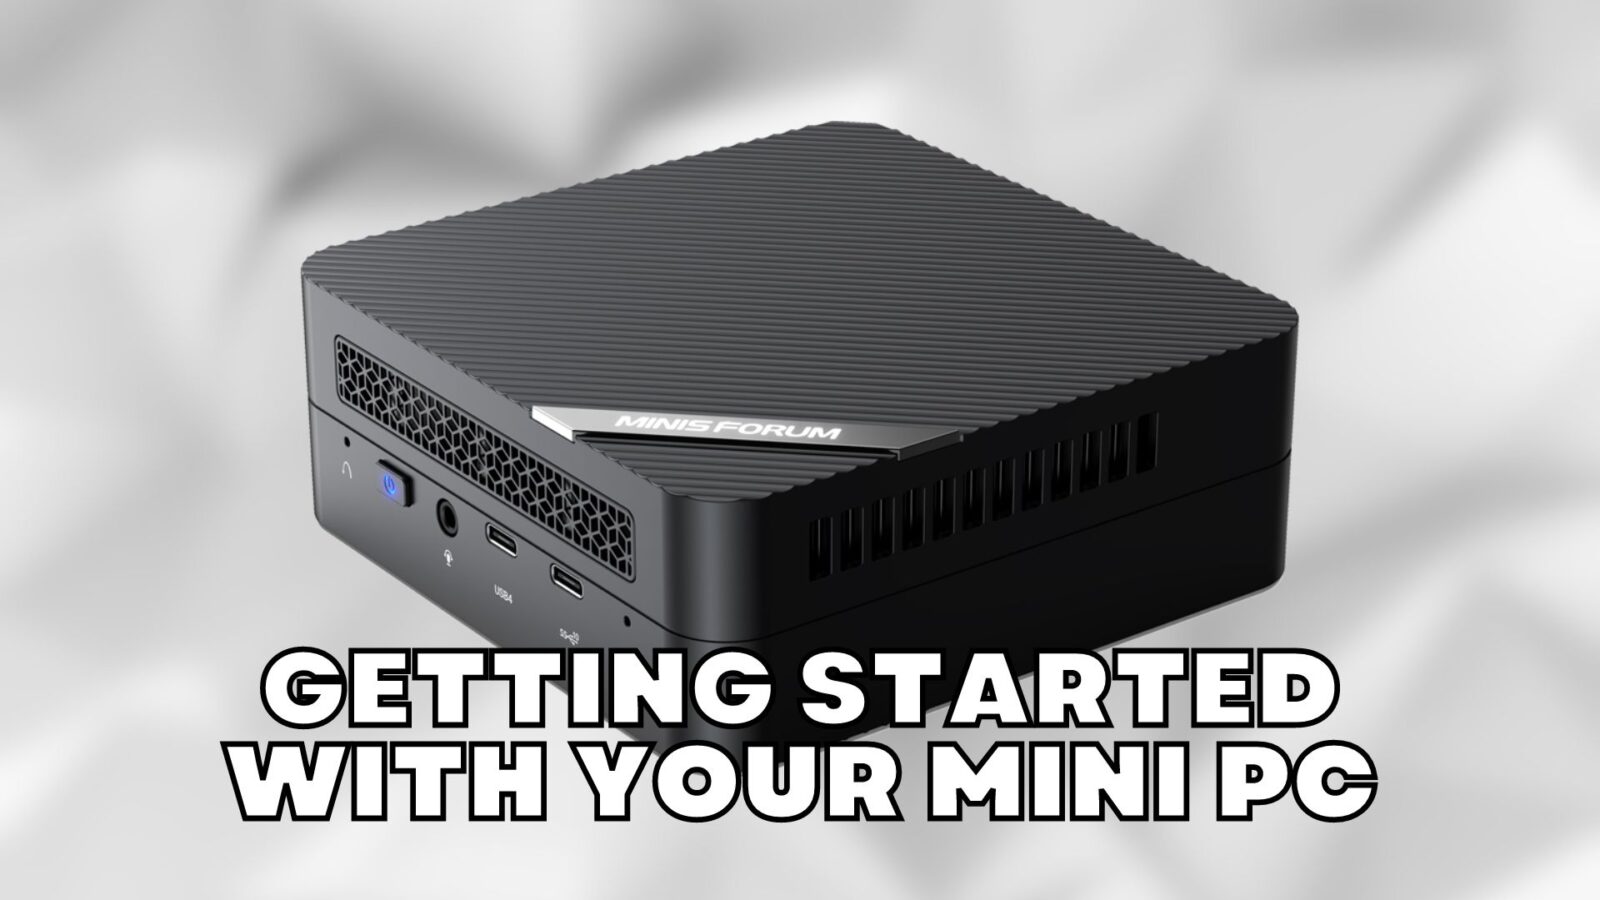 Getting started with your Mini PC